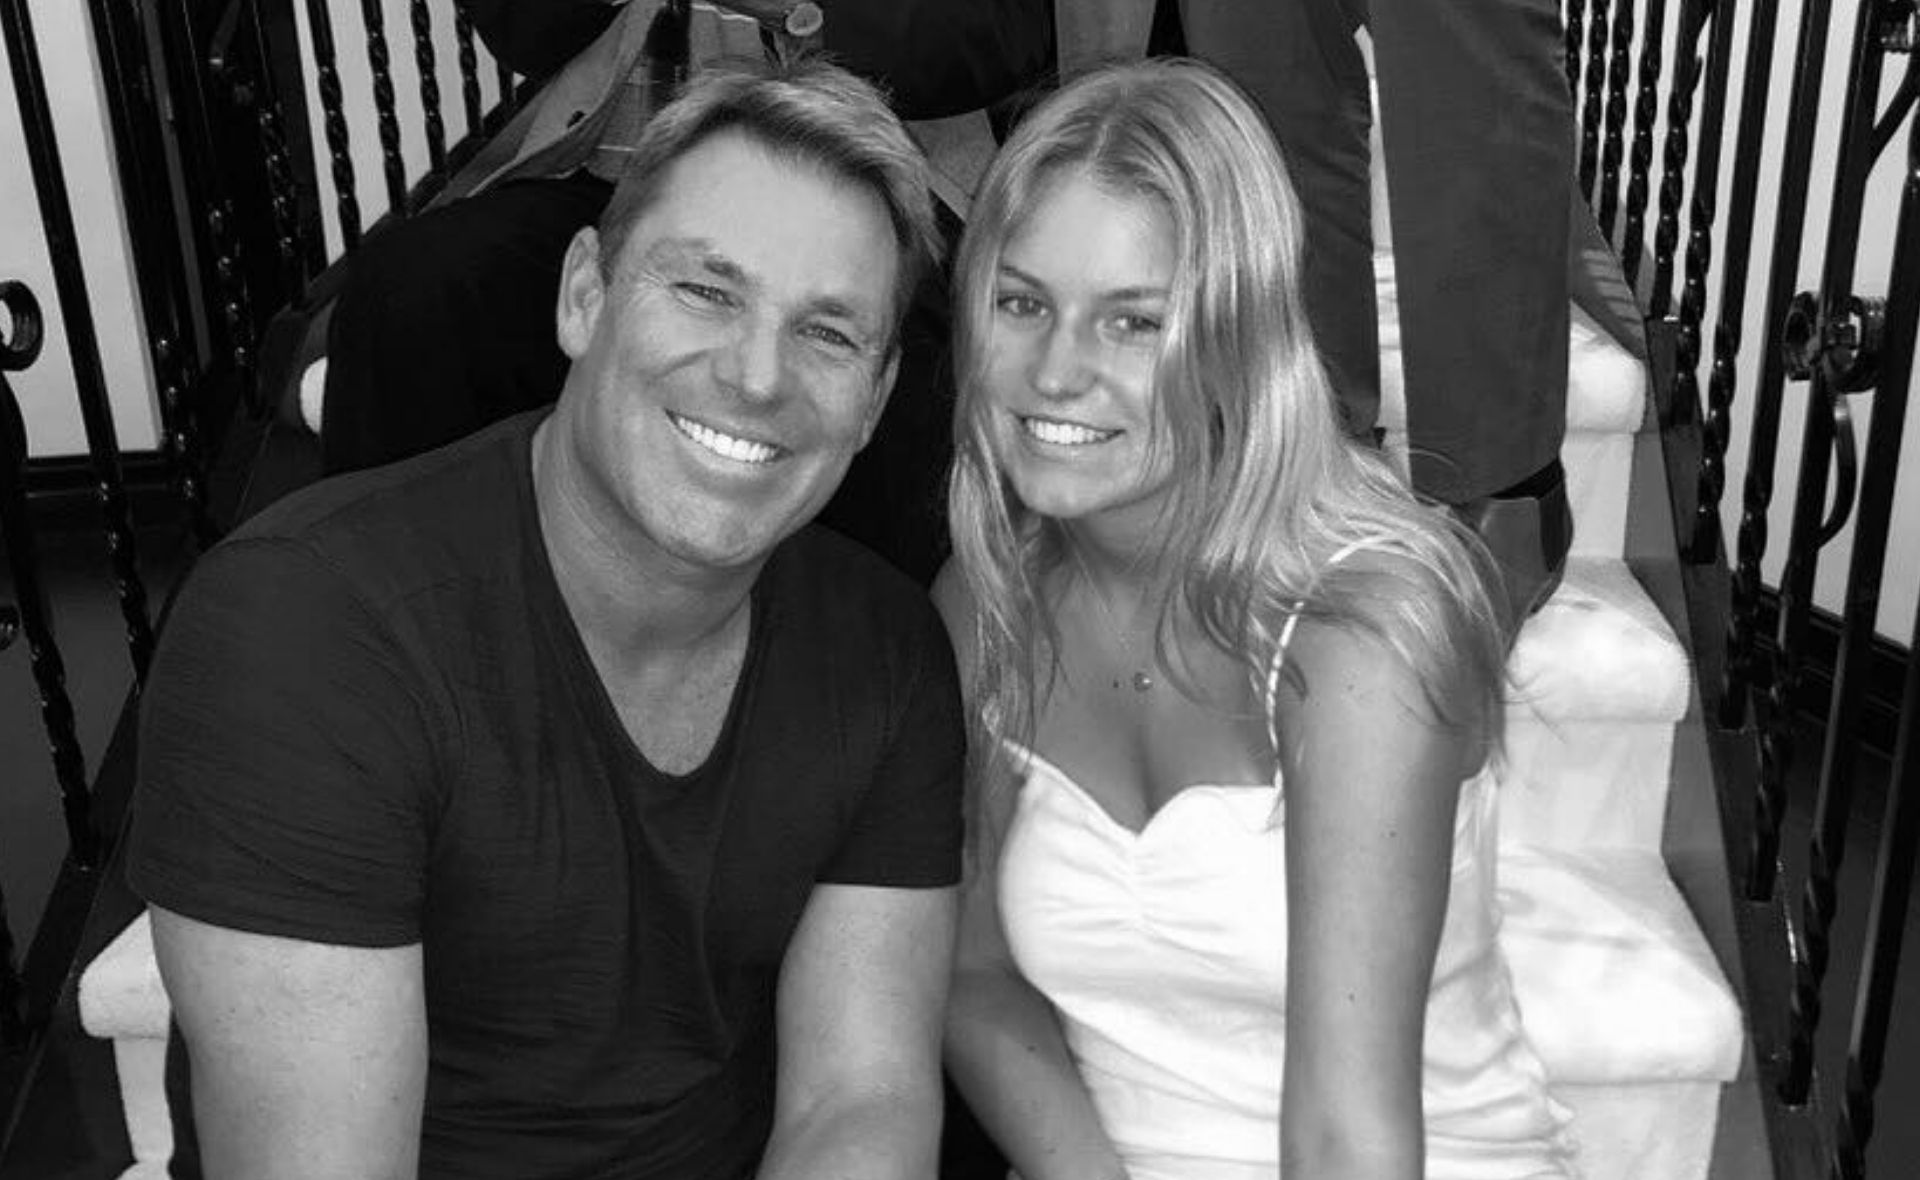 Summer Warne’s final moments with father Shane Warne prove their relationship brought out the best side of him